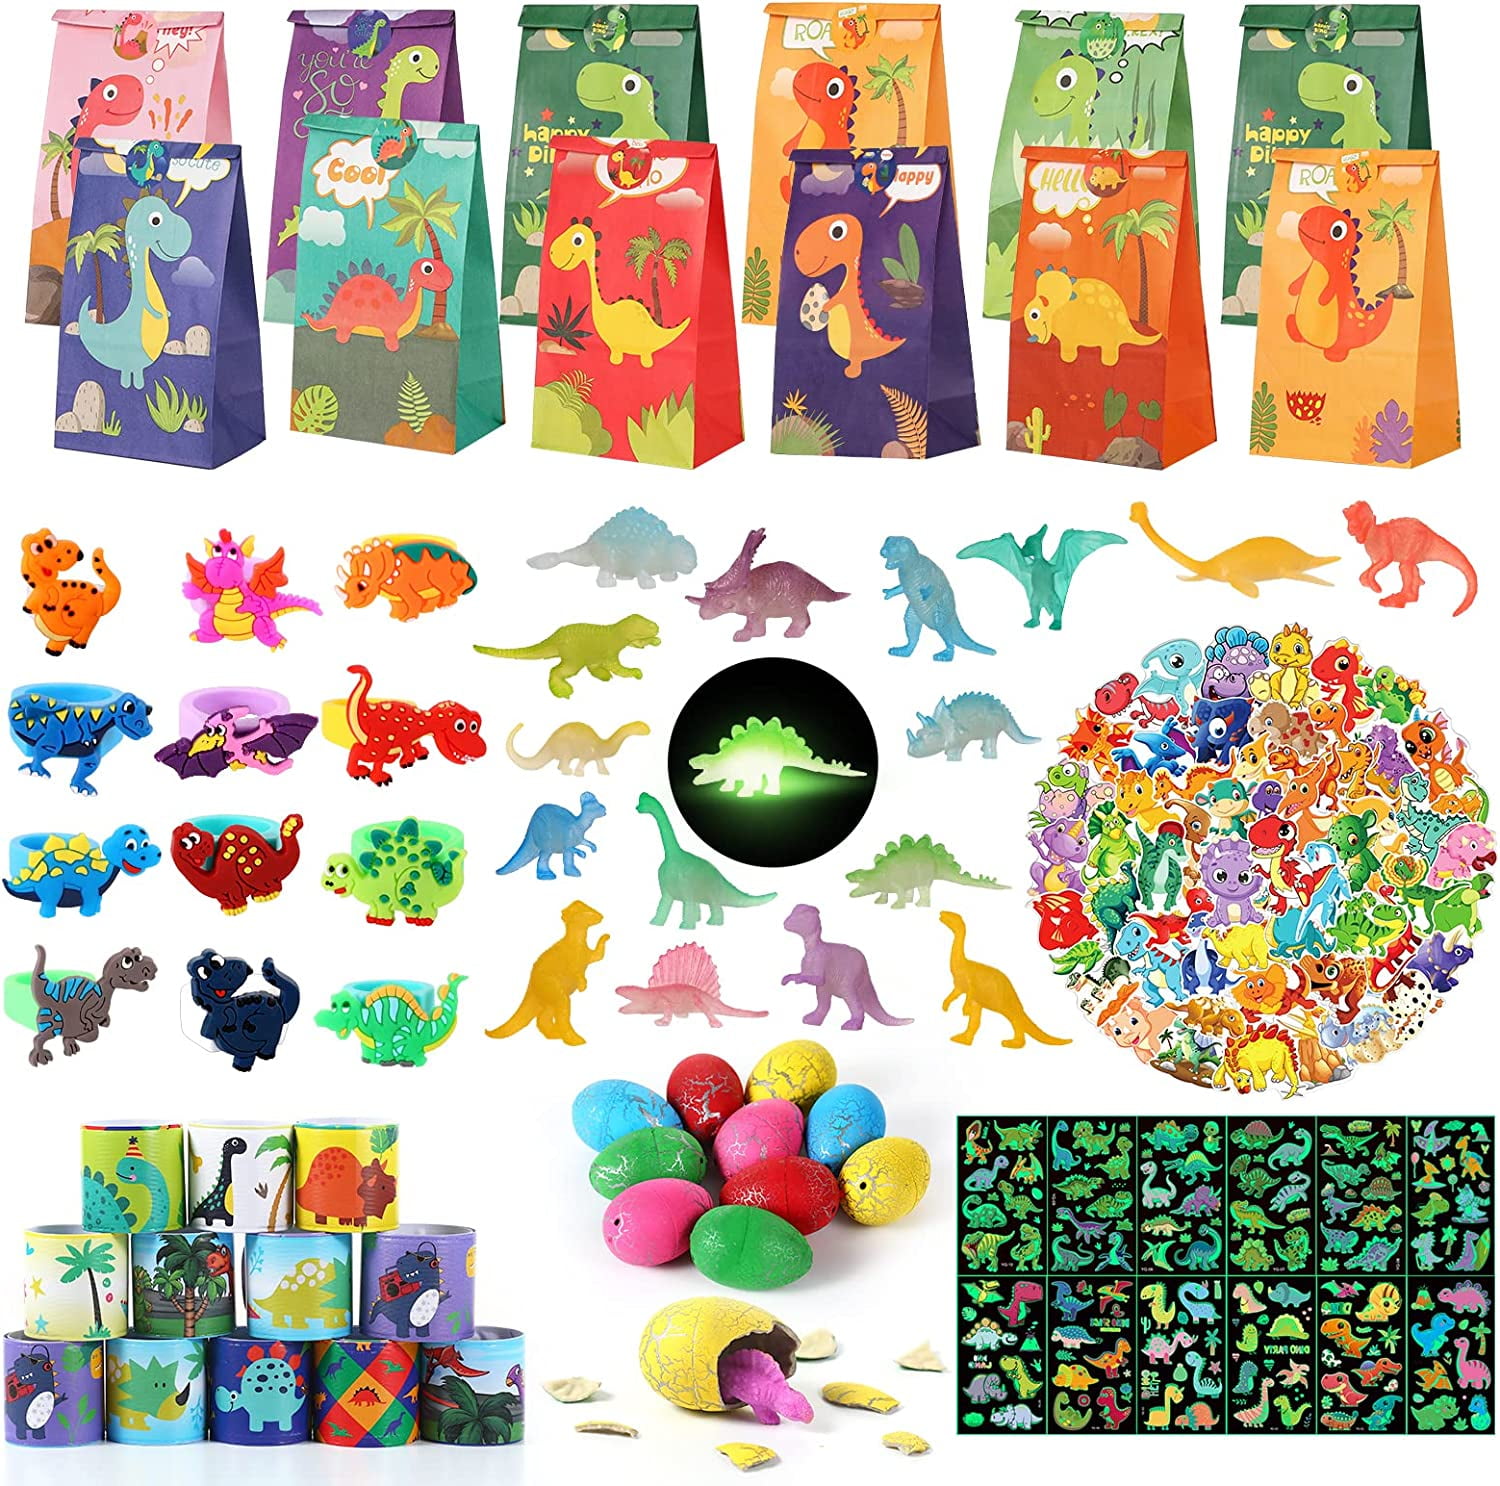 20 Pack Coloring Books for Kids Ages 2-4, 4-8, 8-12 Birthday Party Favors  Gifts Includes Unicorn Dinosaur Mermaid Animal More Designs Goodie Bags  Stuffer Fillers for School Classroom Activity Supplies